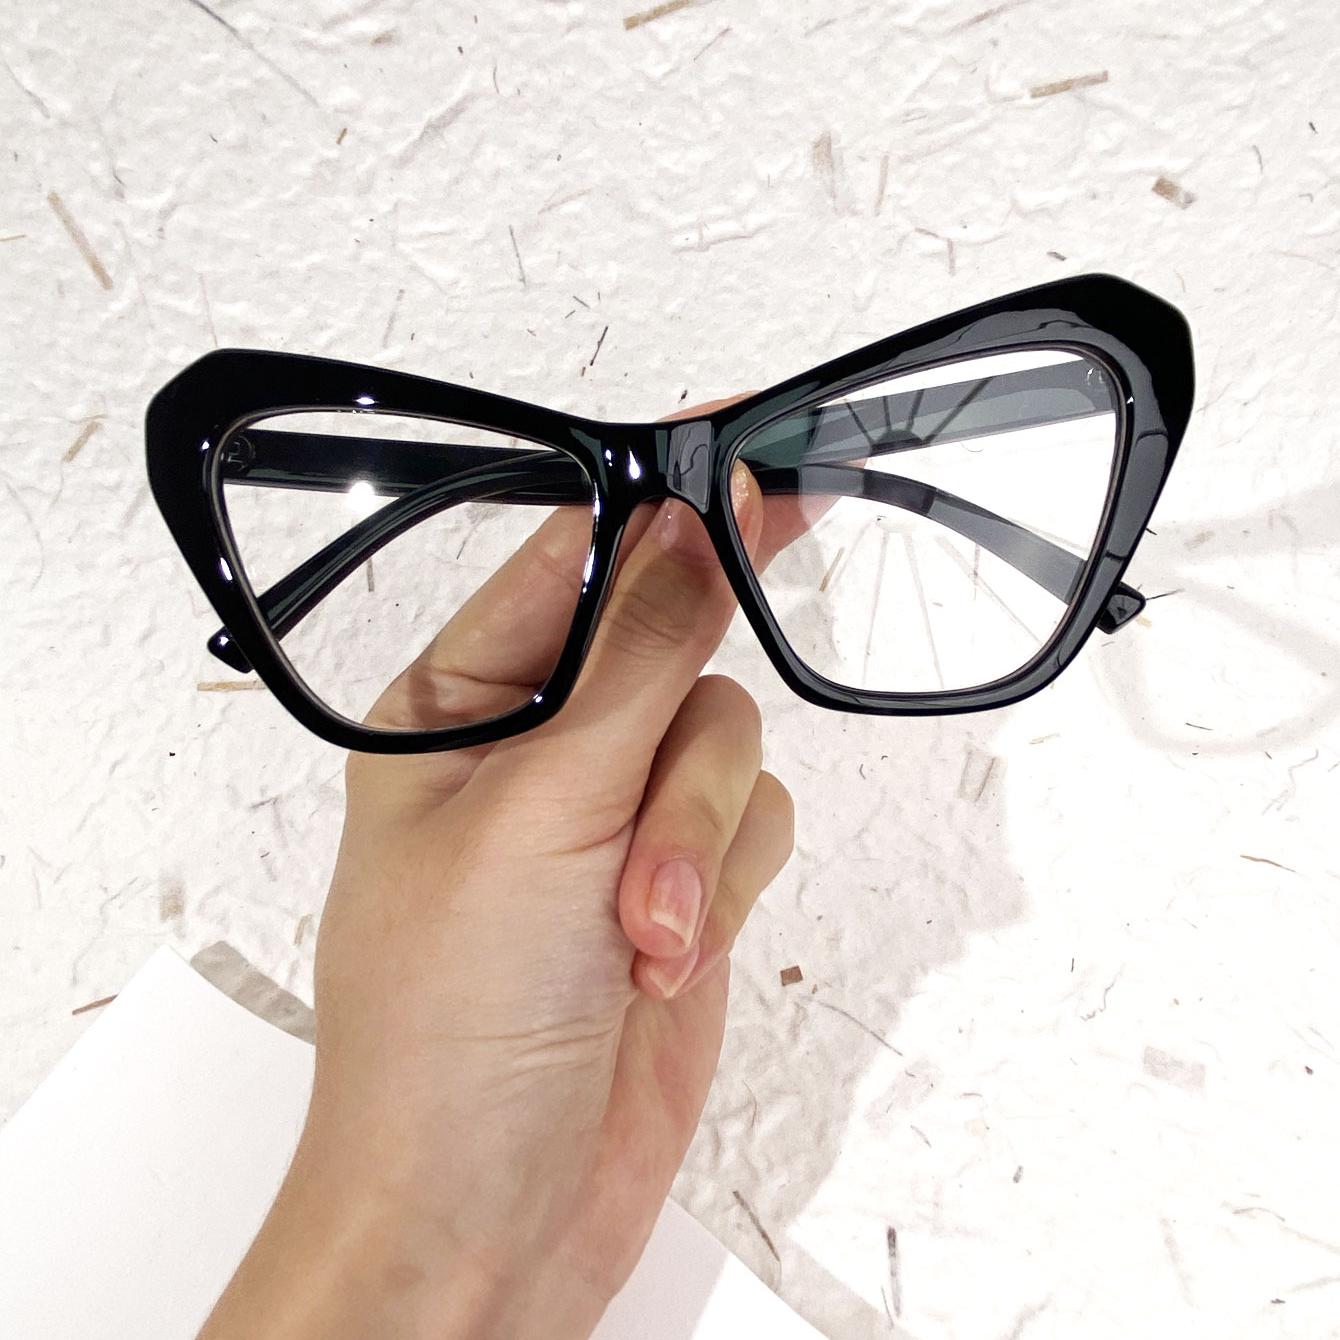 10 recommended stylish cat eye glasses for women